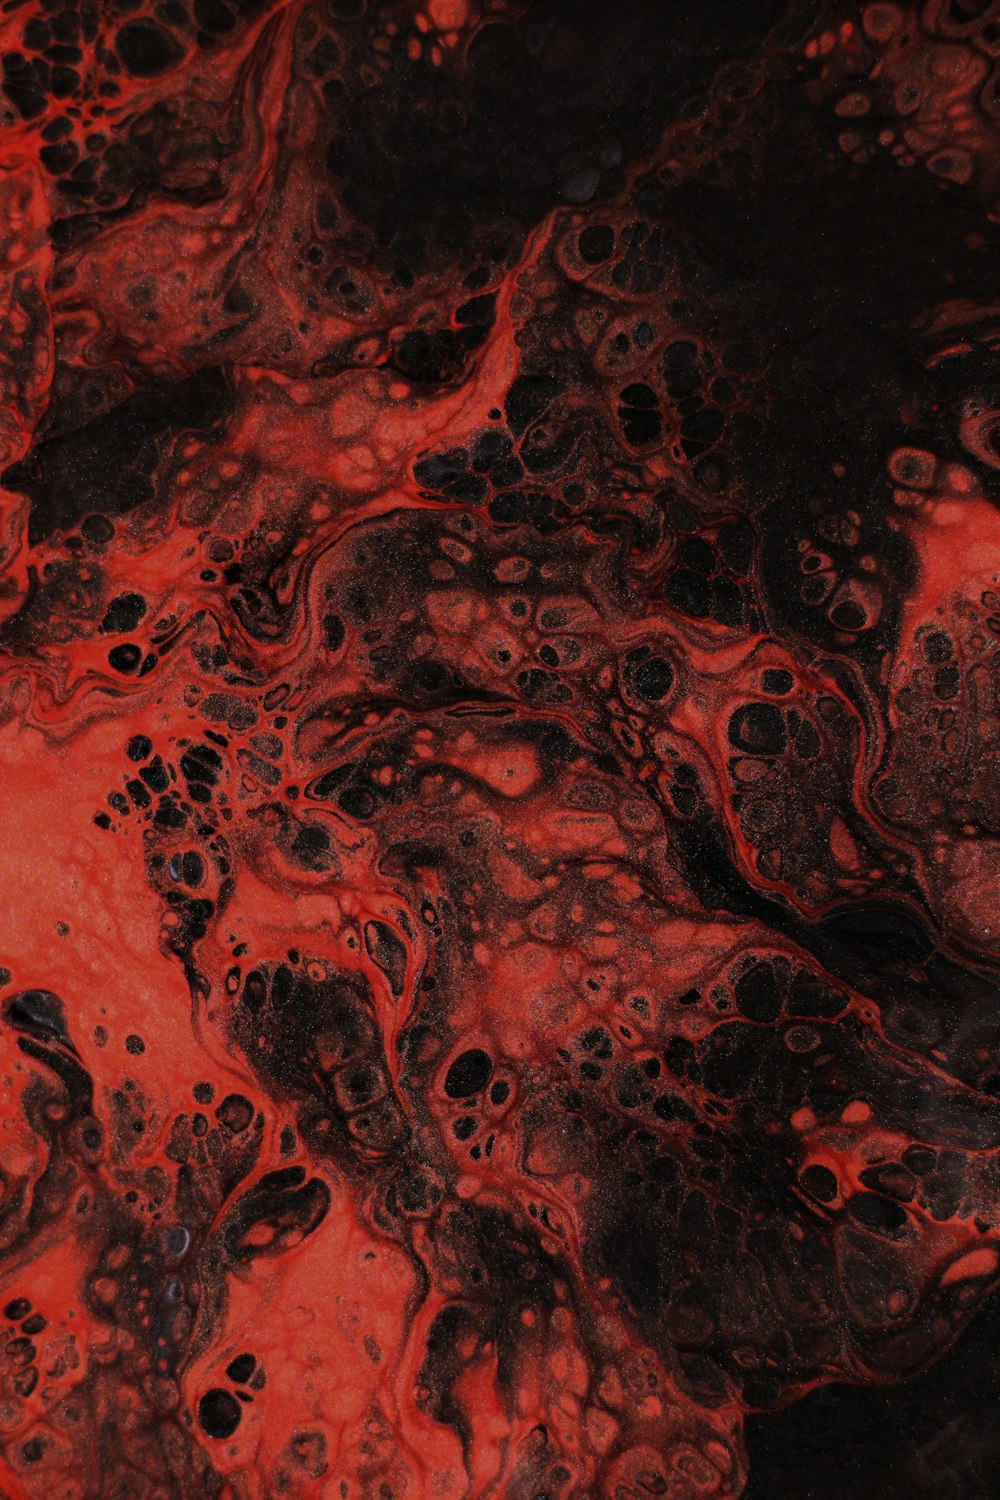 a close up of a red and black substance